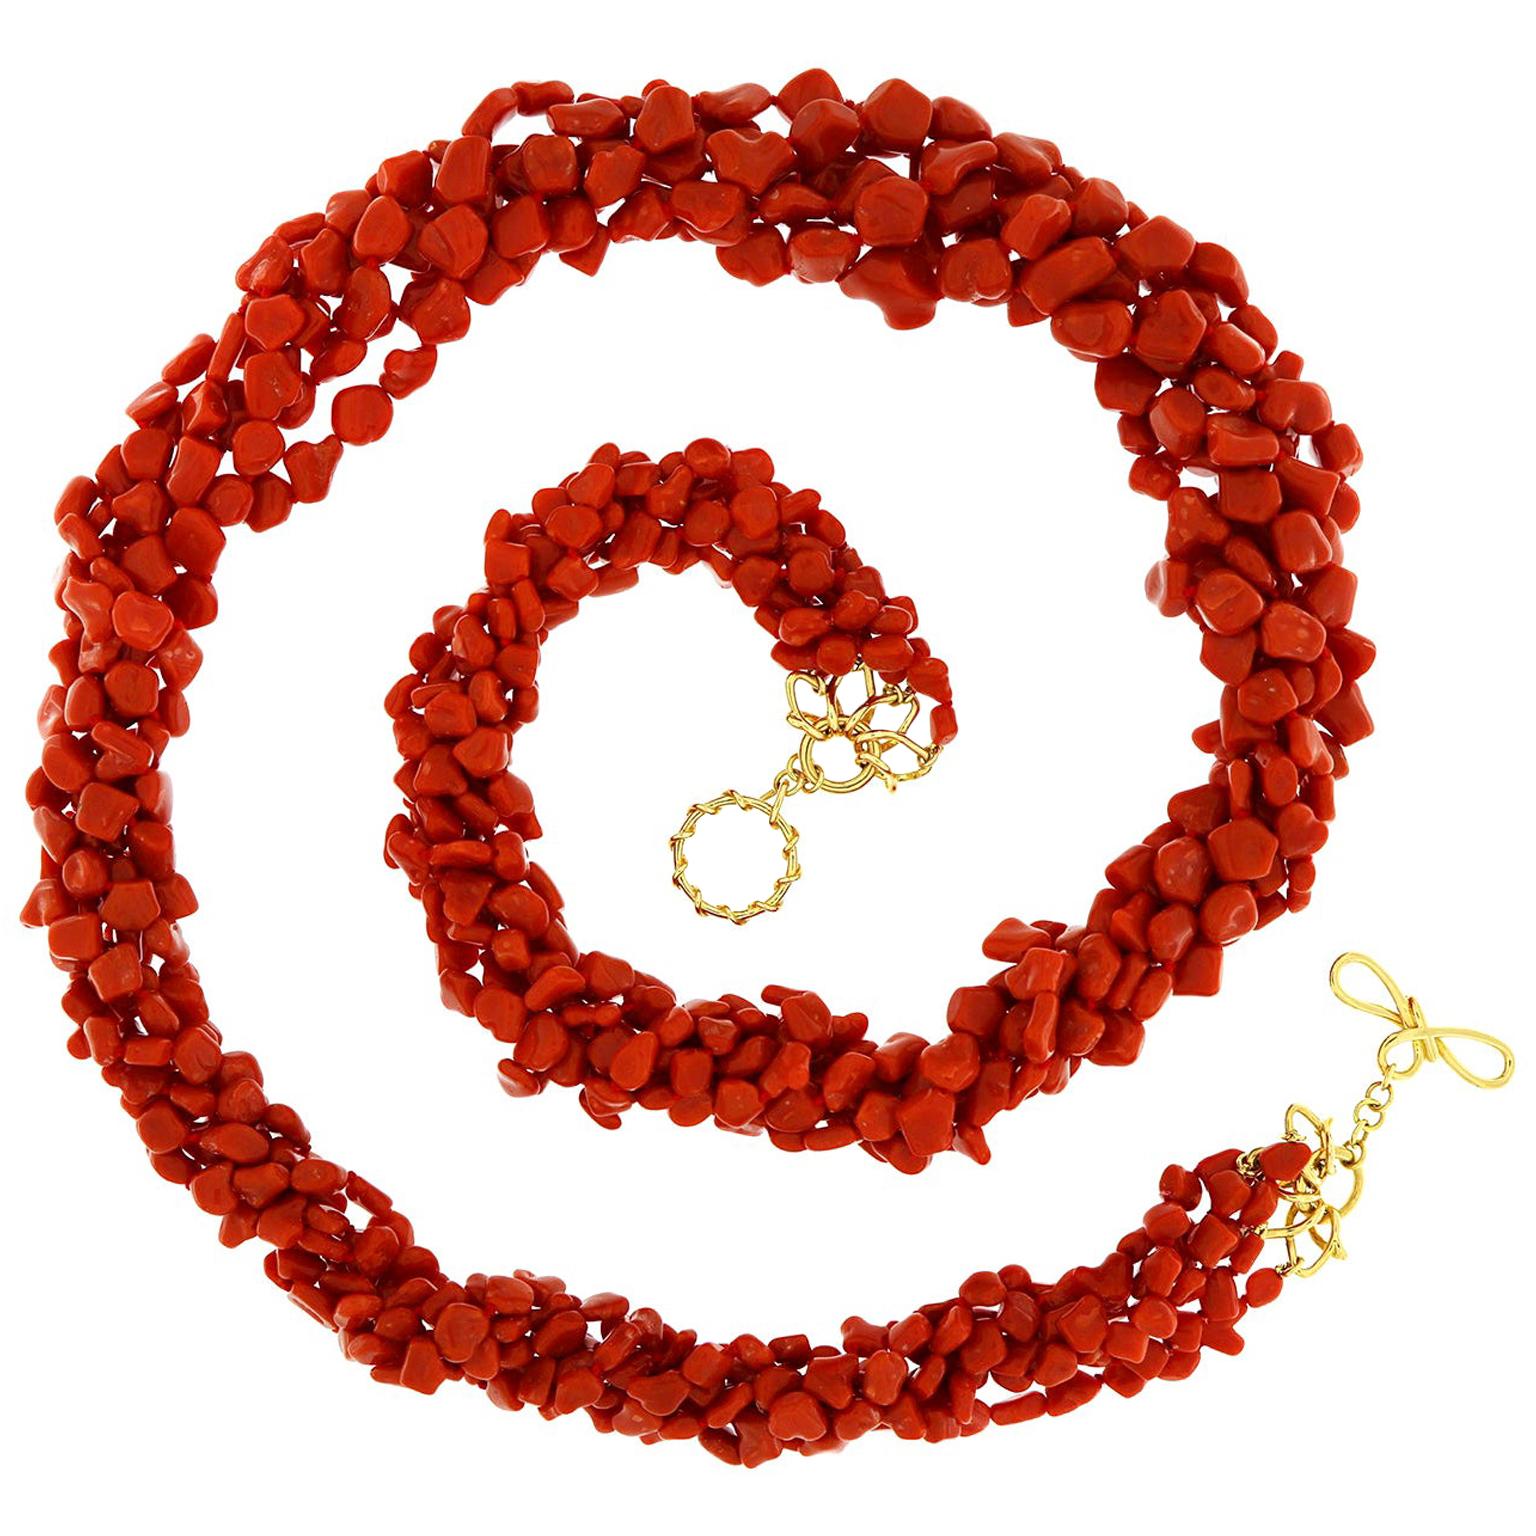 Valentin Magro Multi Strand Sardinian Red Coral Nugget Necklace